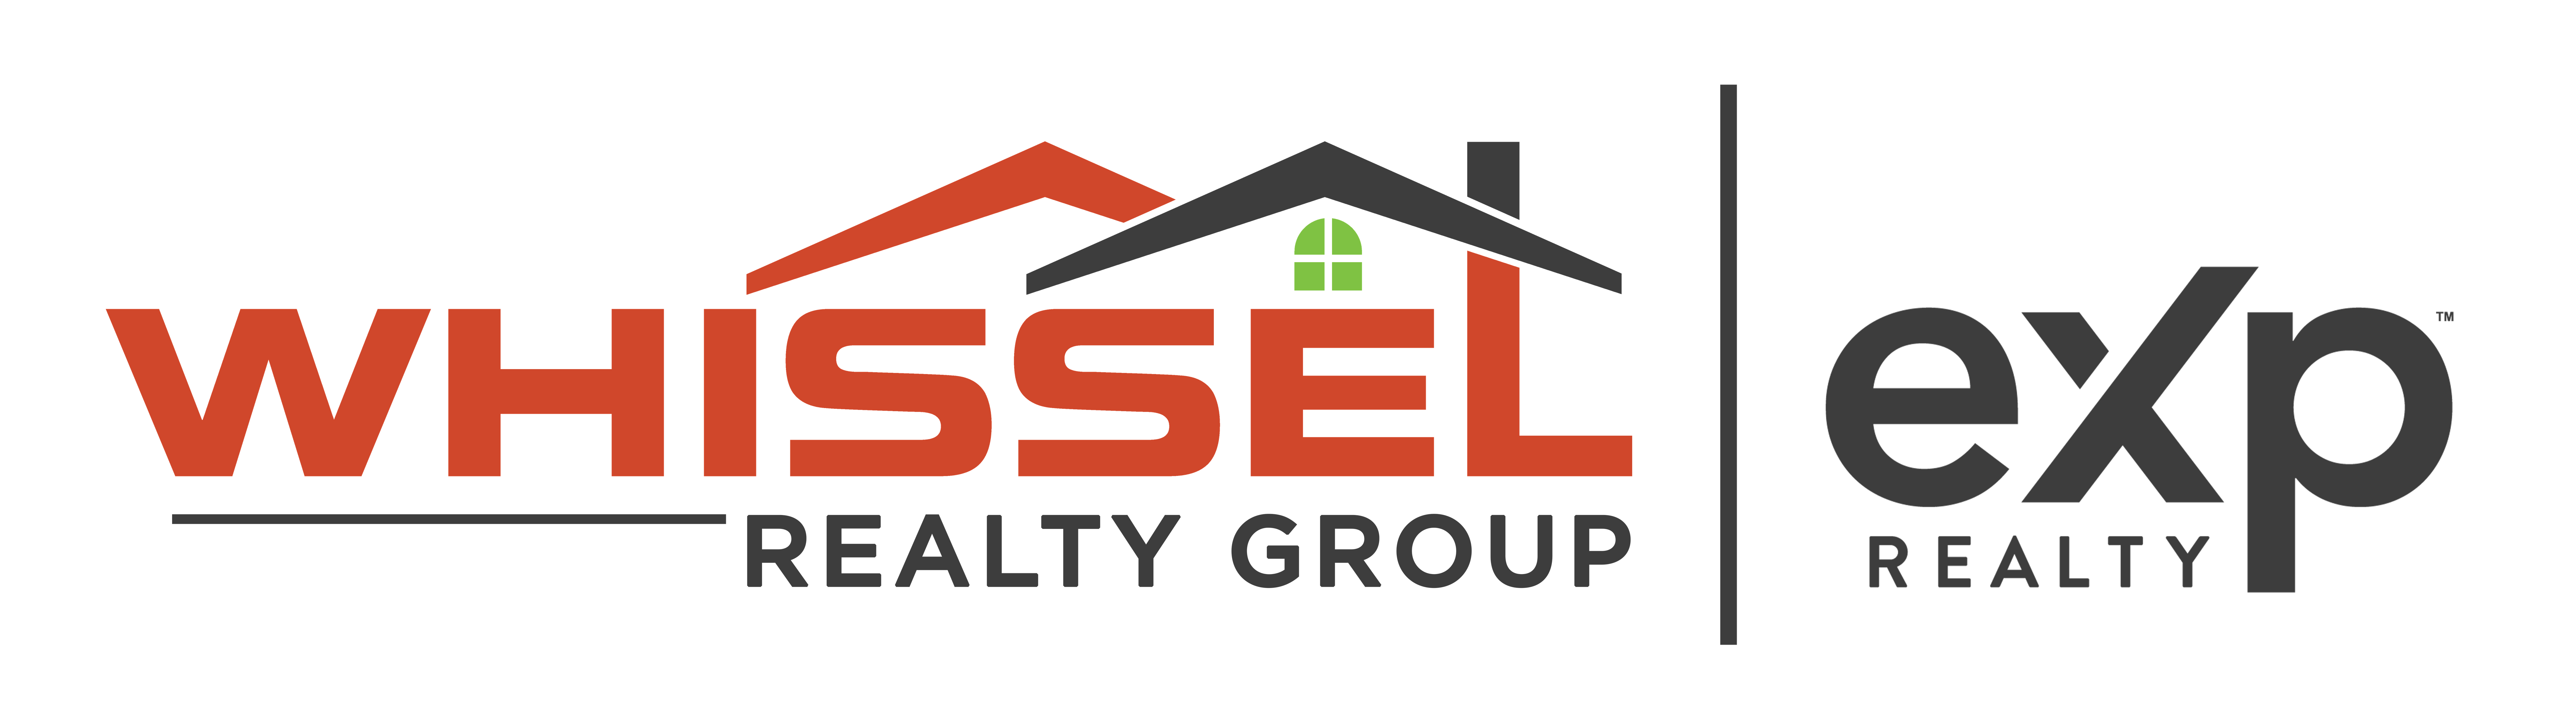 Whissel Realty Group